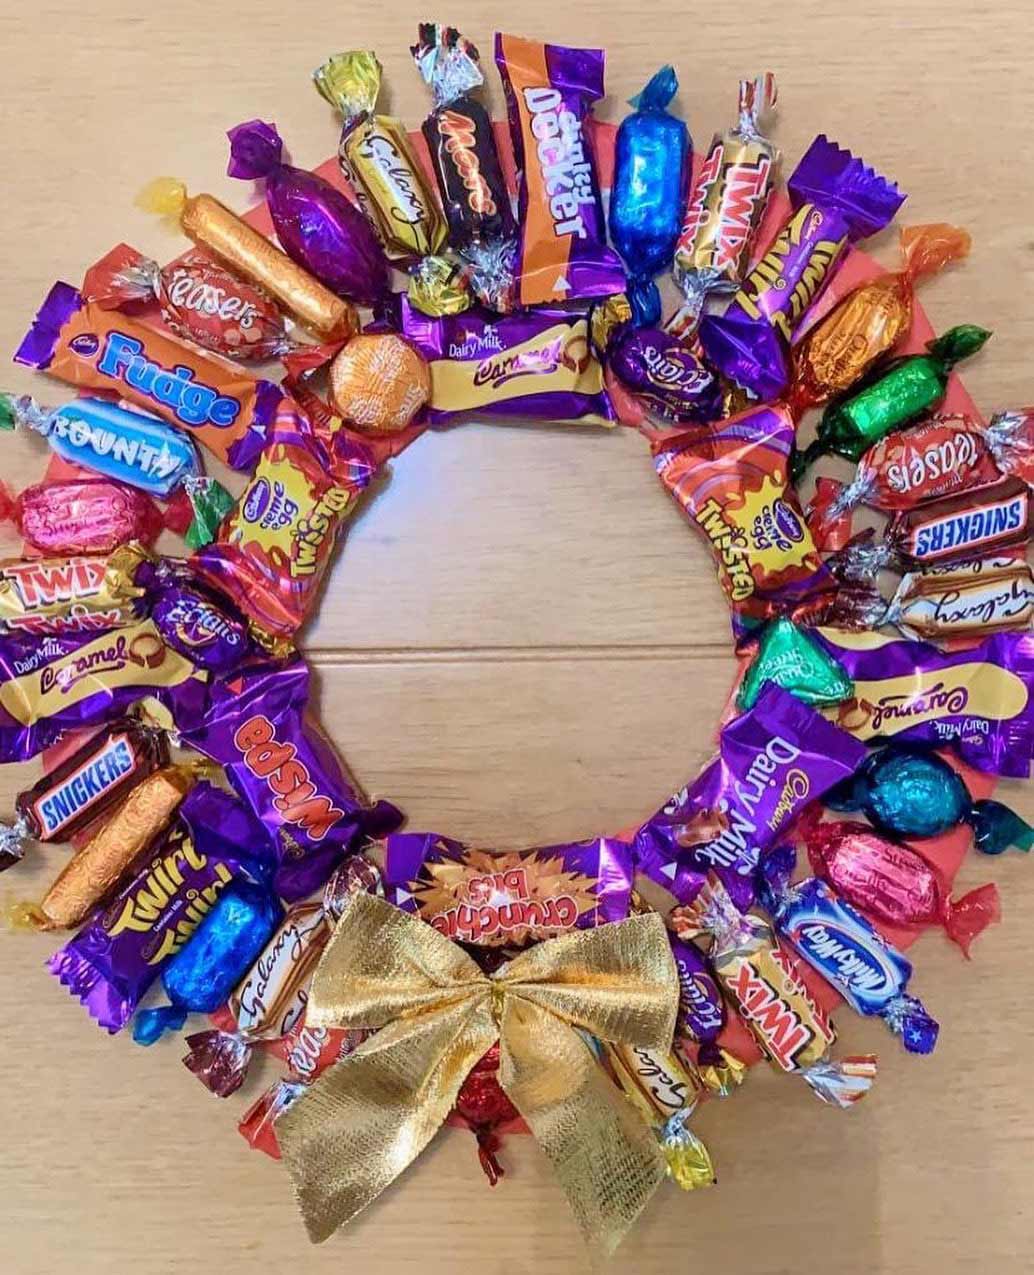 Wreath made from candies